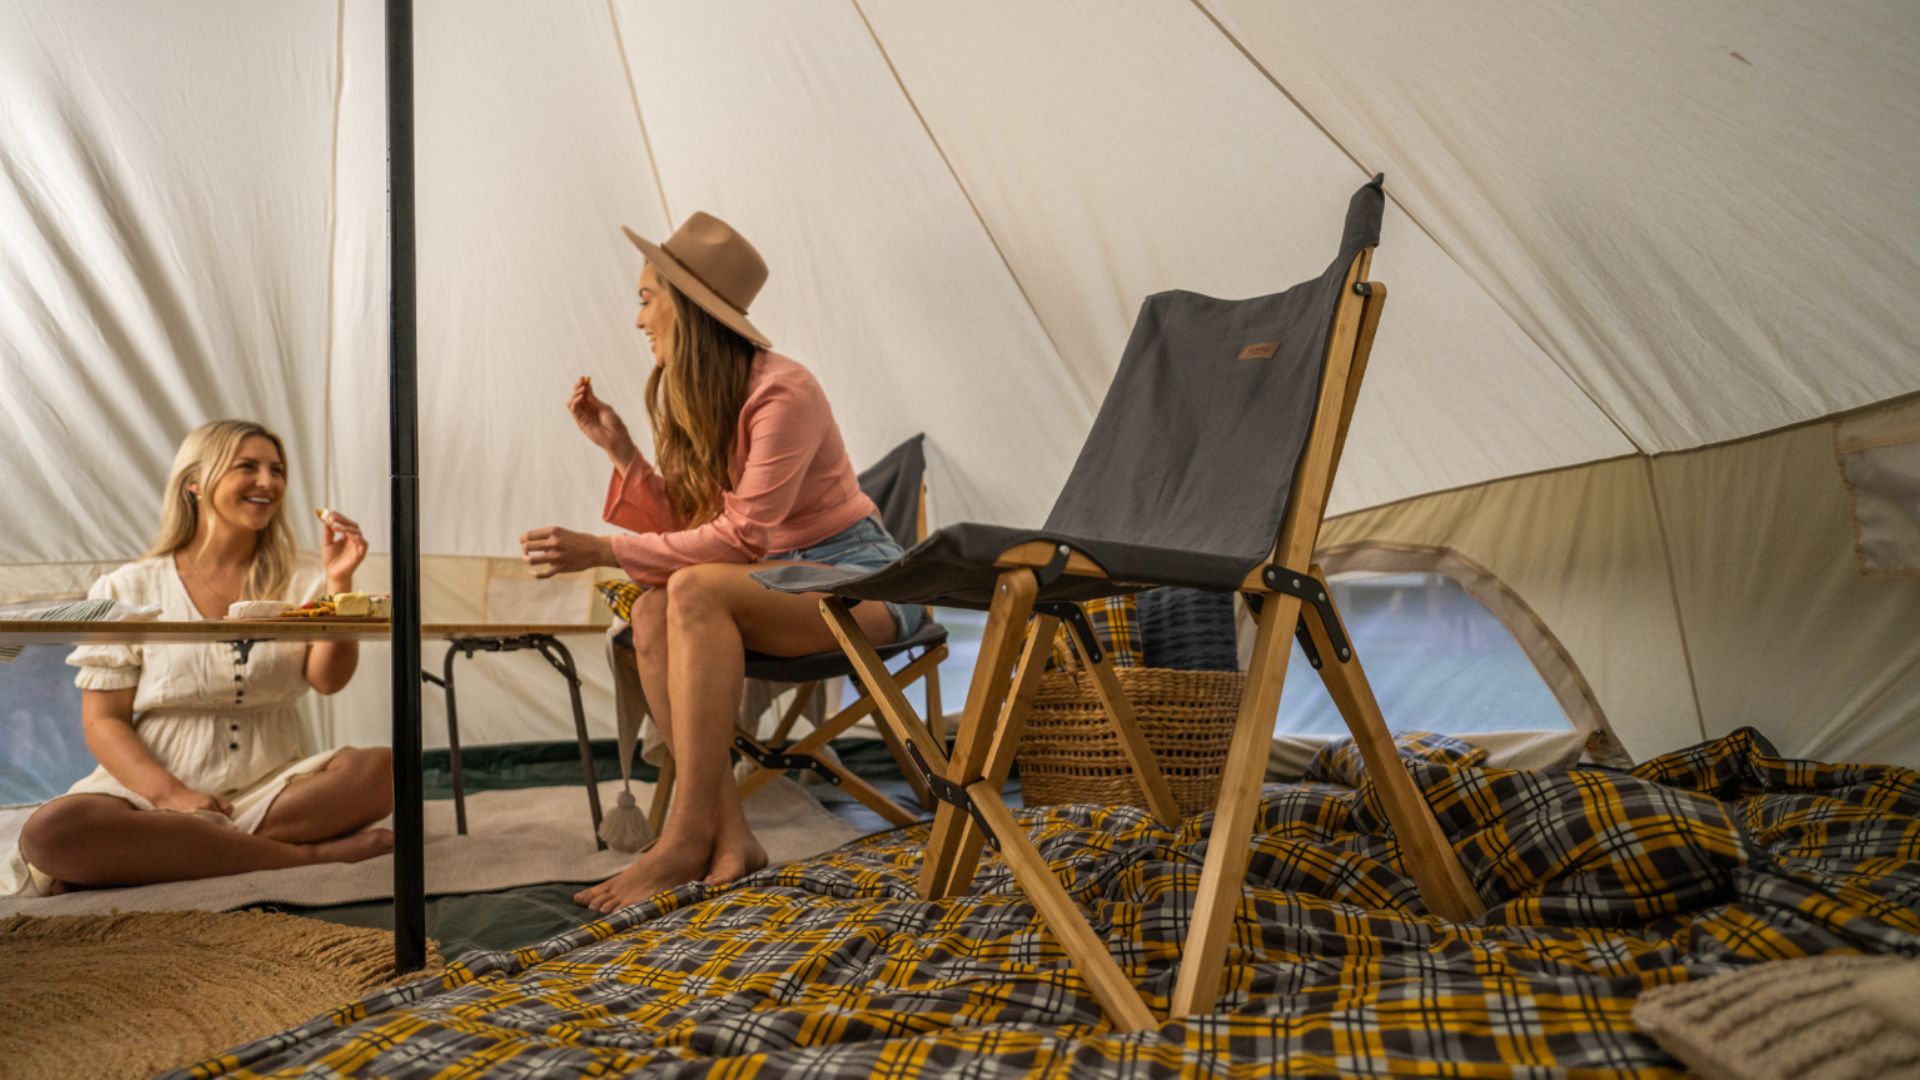 Camping tent set up with chairs, rugs and foldable table